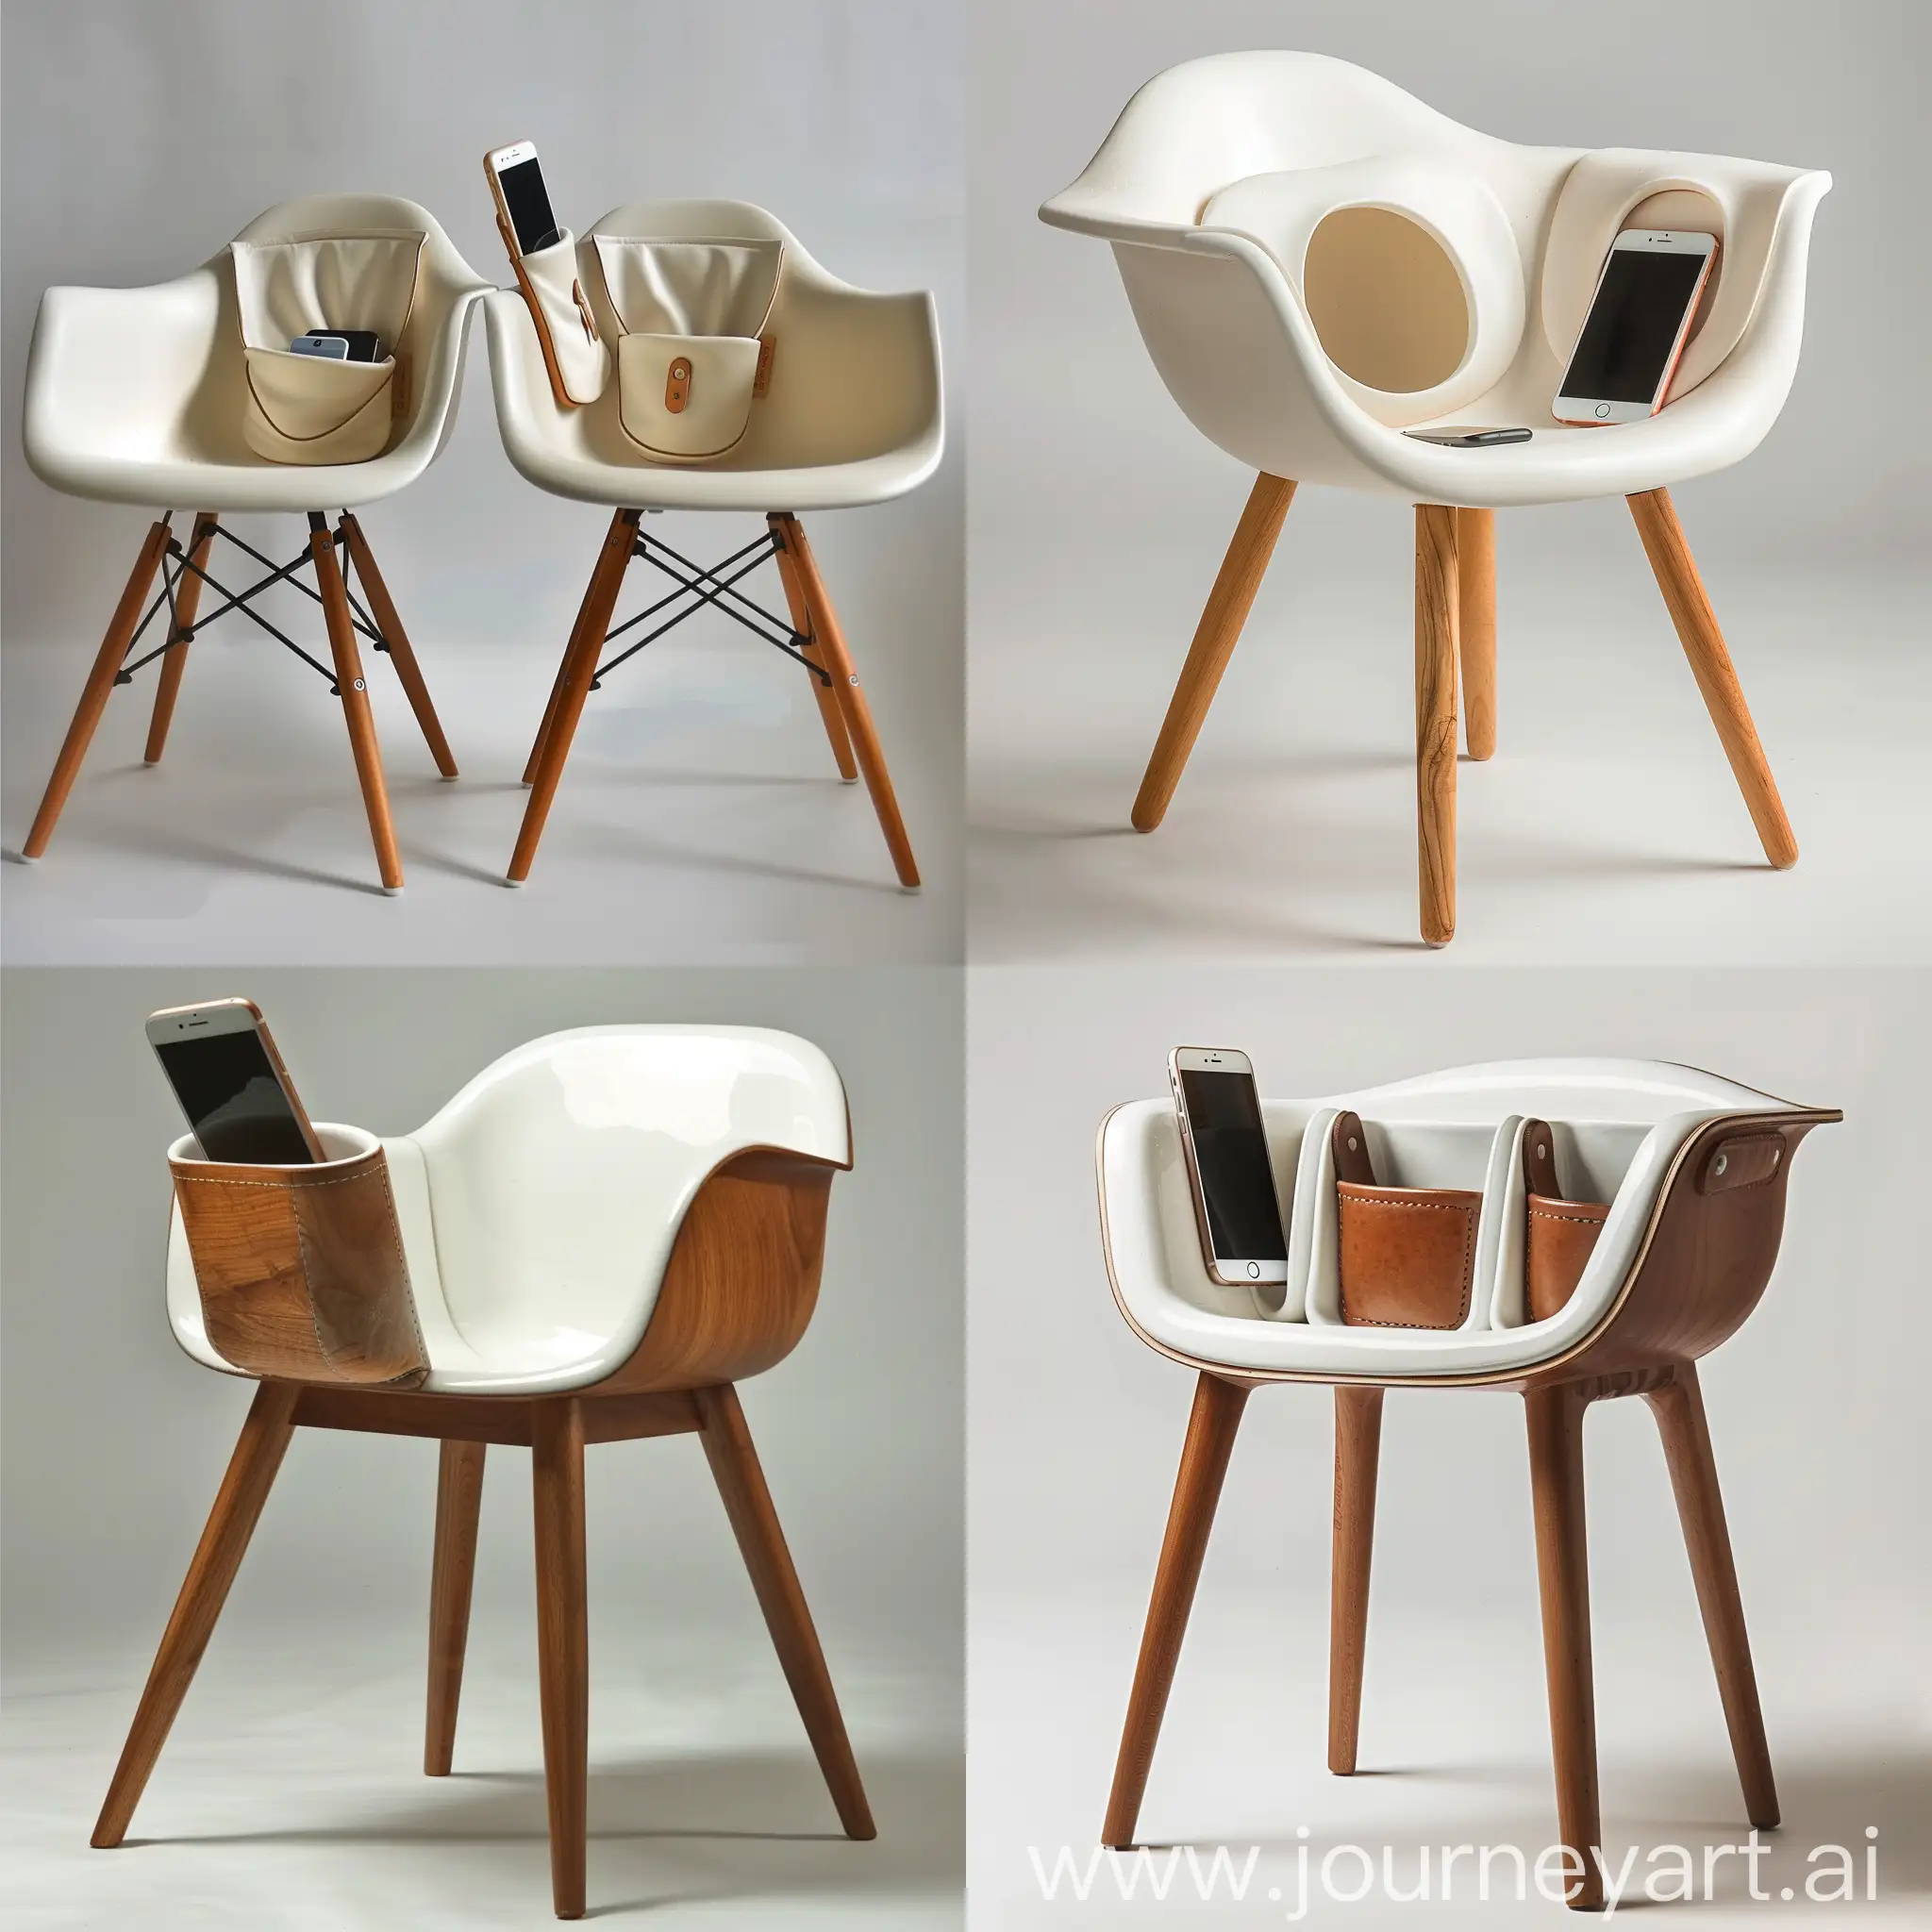 Minimalistic-Japandi-Style-Chairs-with-Slender-Legs-and-Ceramic-Phone-Pockets